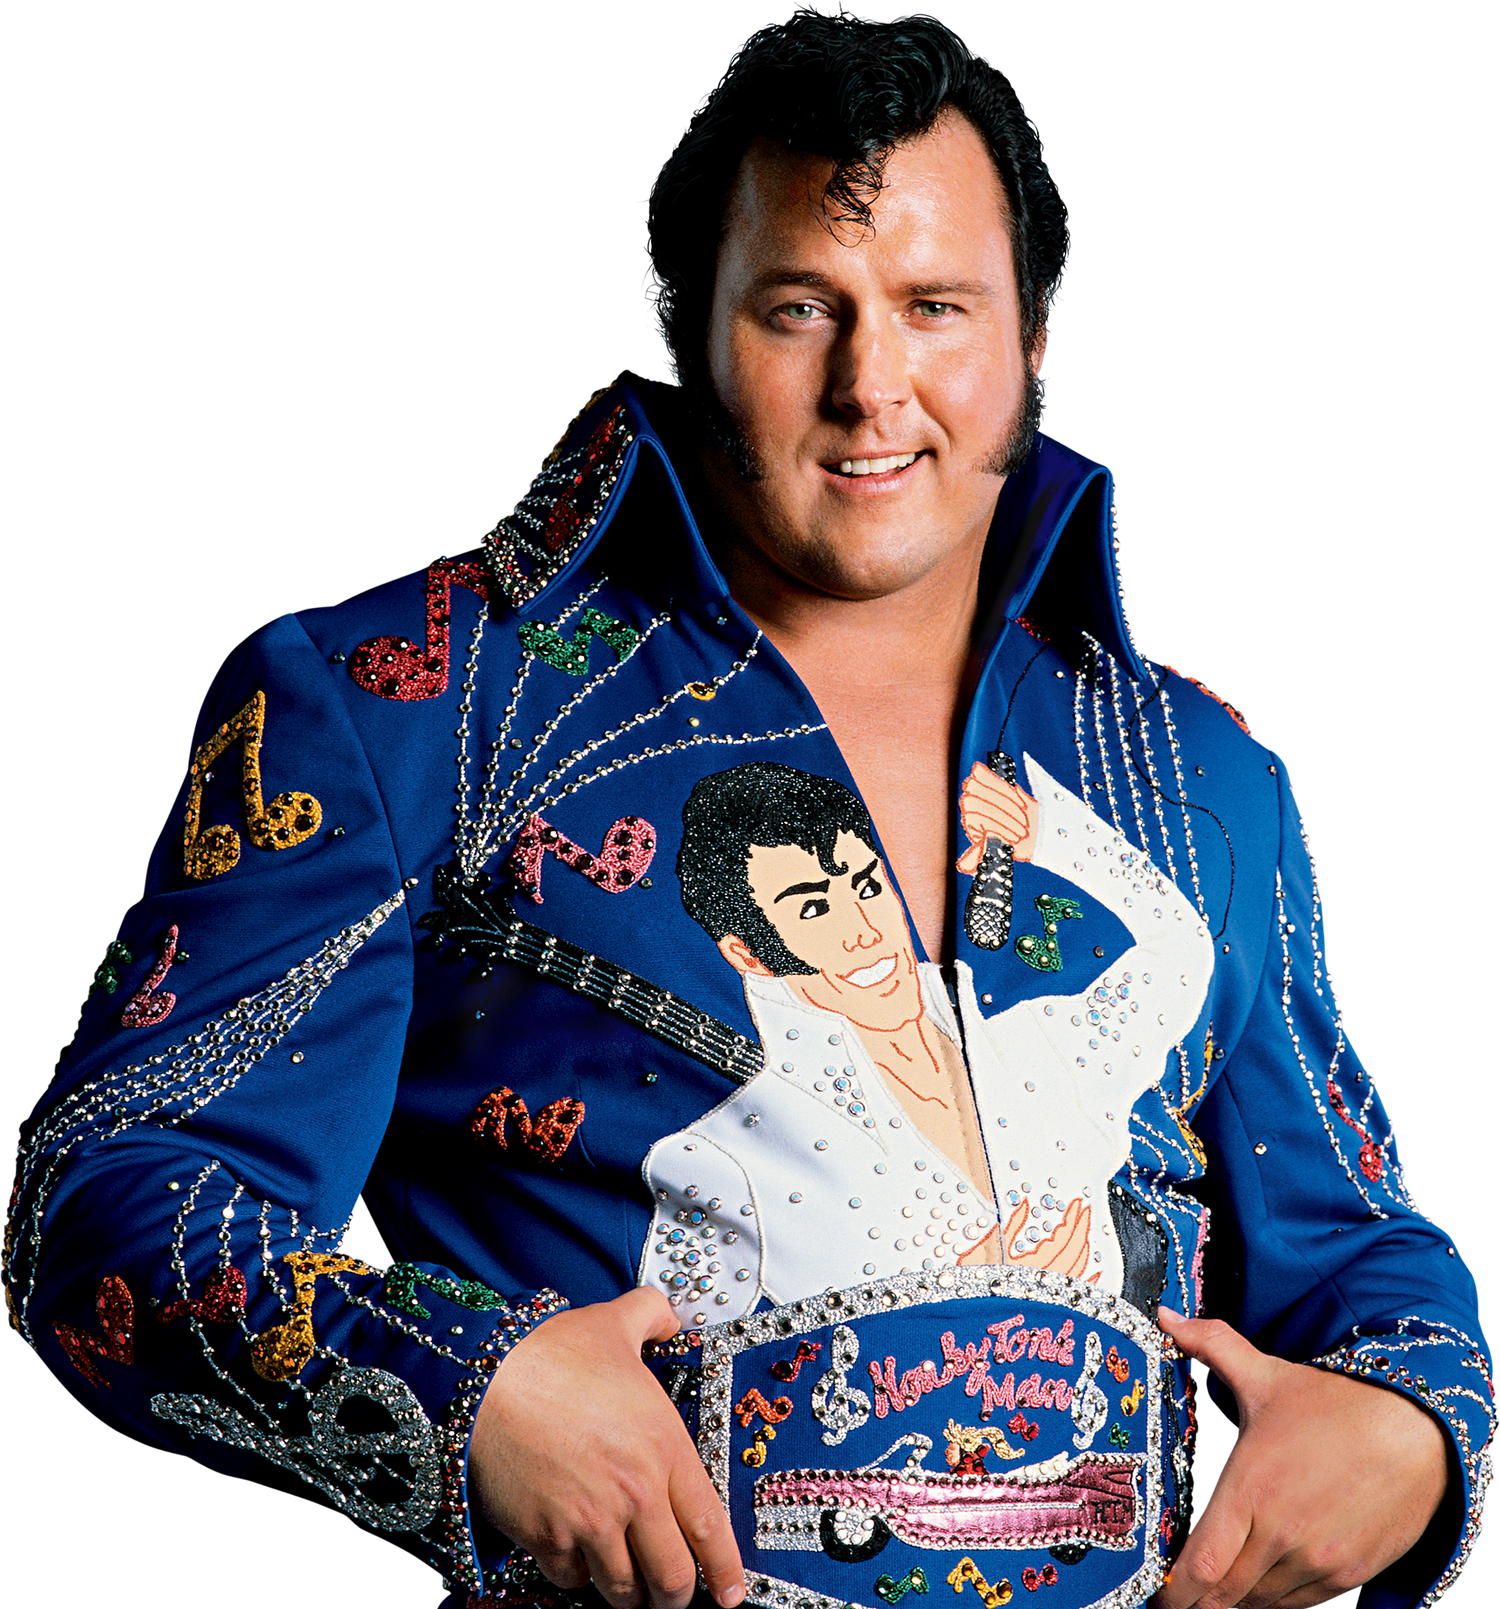 All Honky Tonk Man Wrestling Action Figures